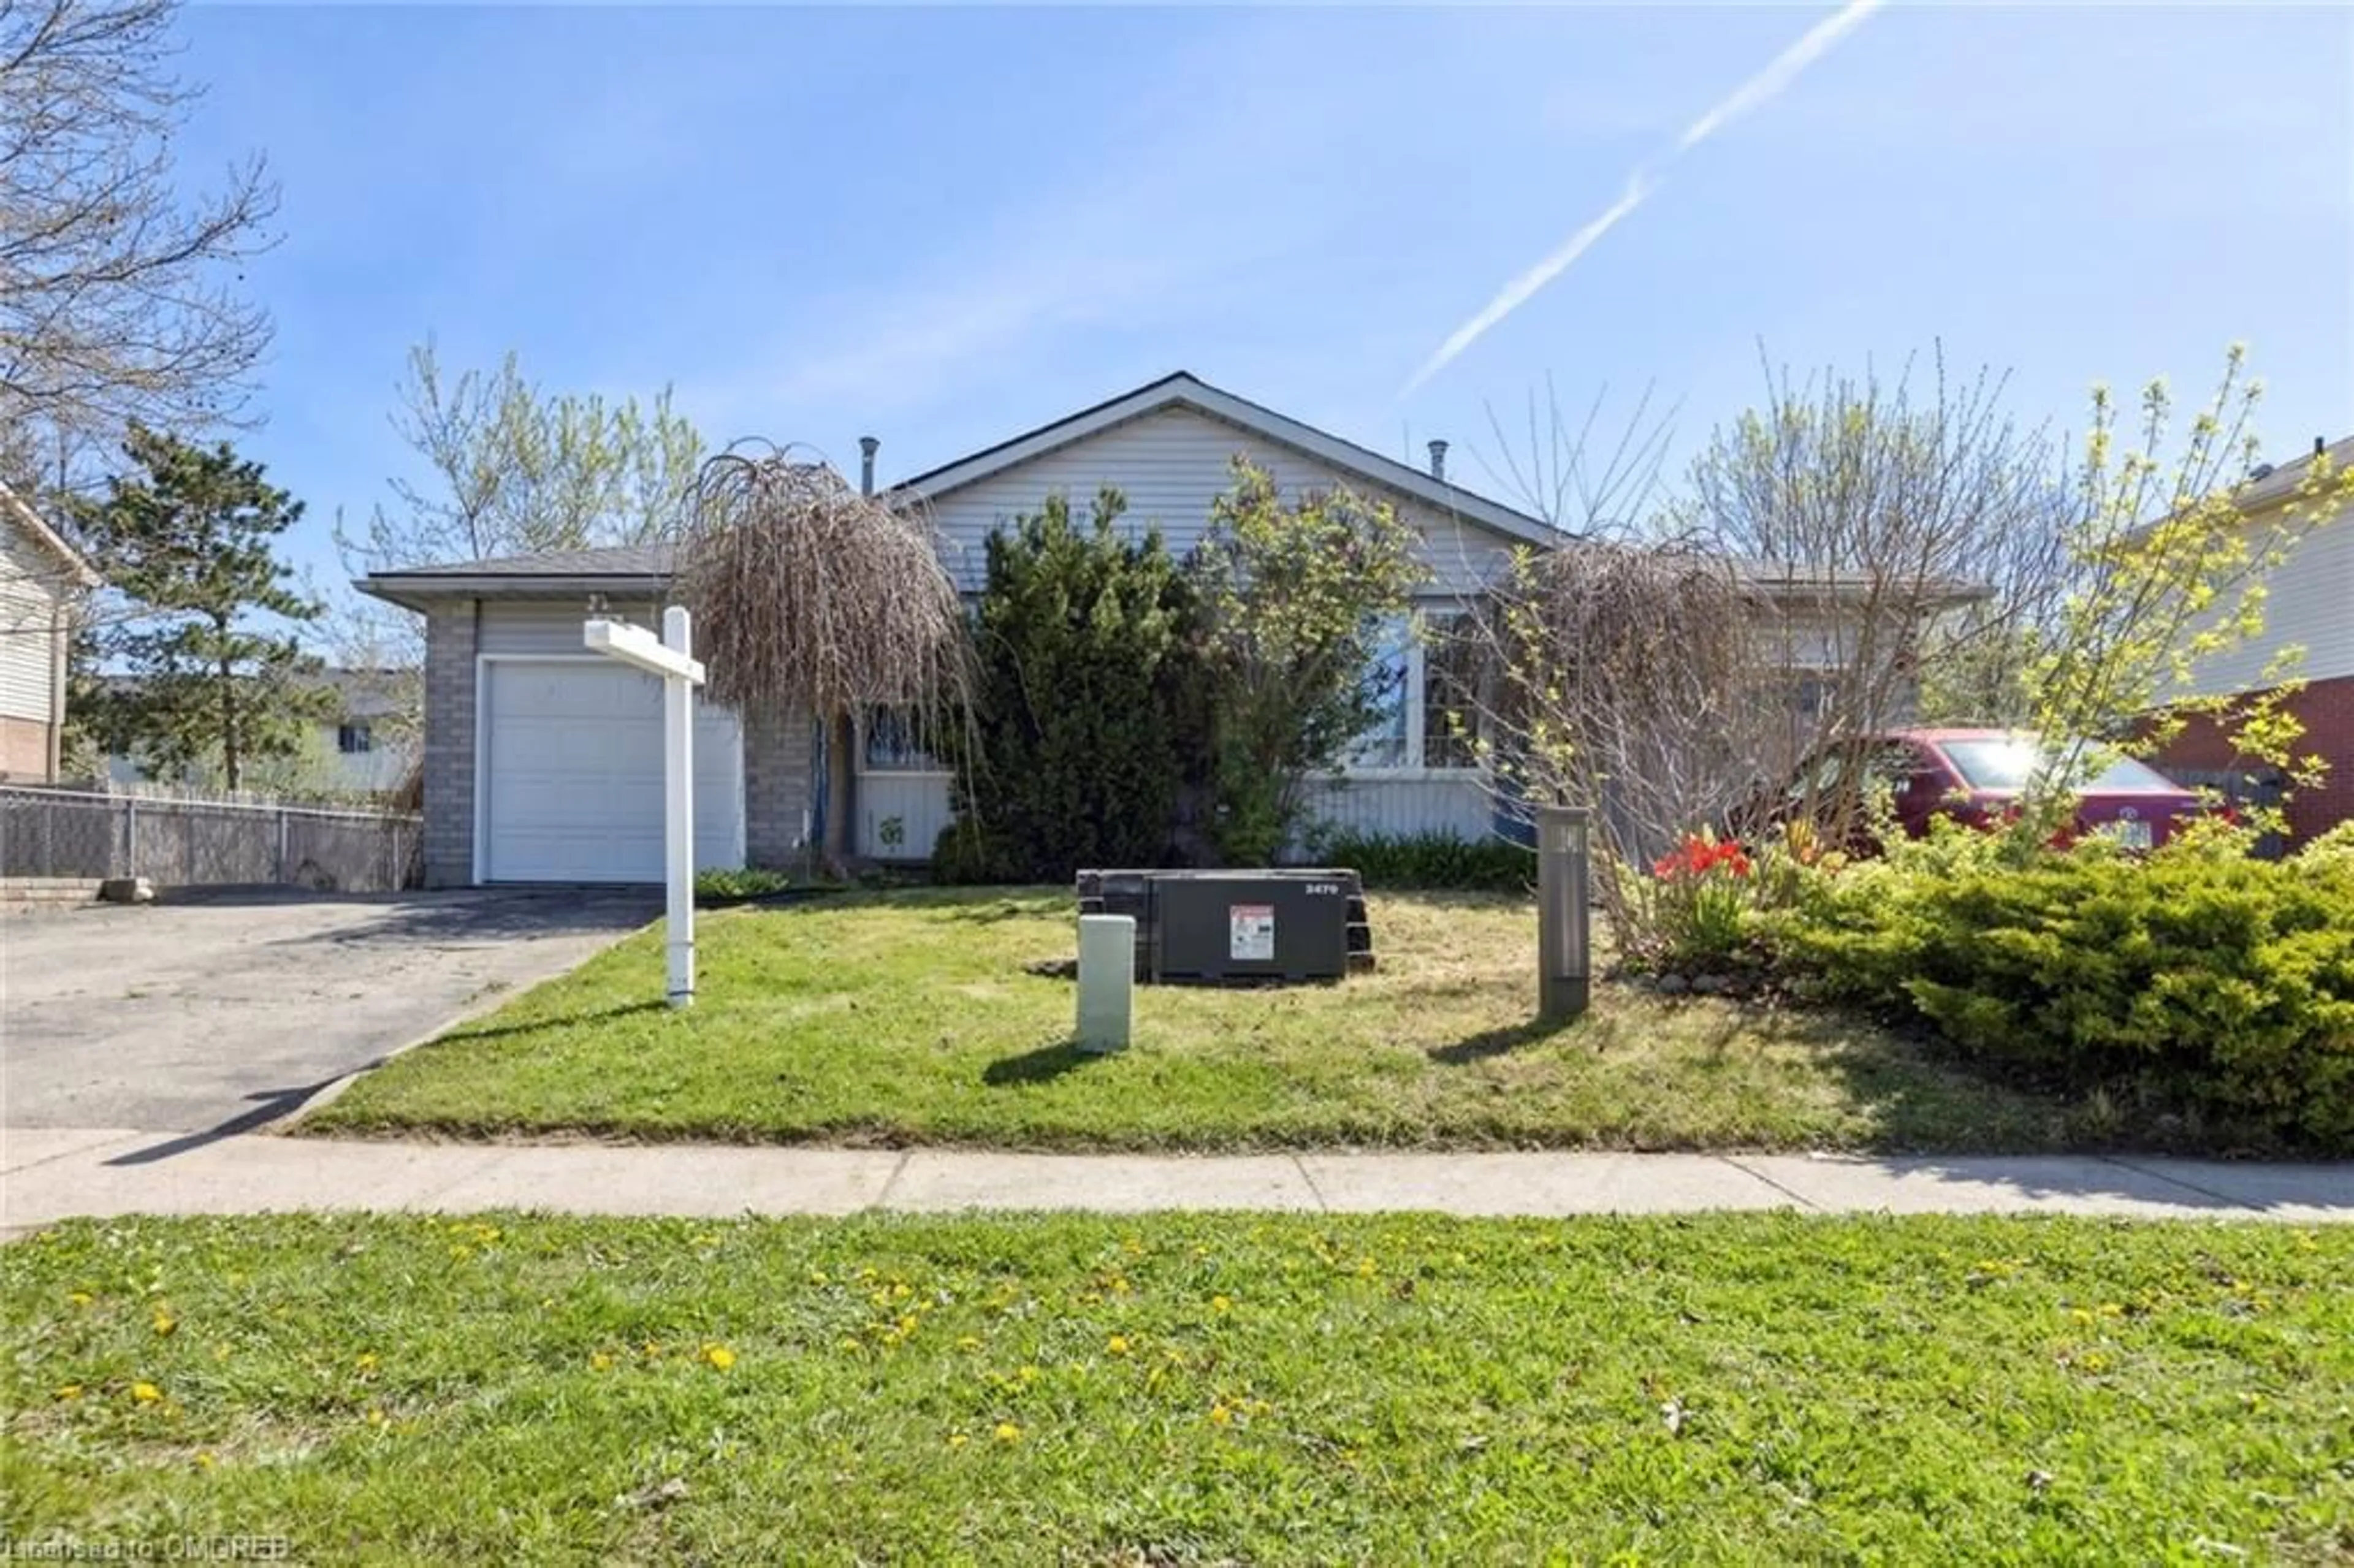 Frontside or backside of a home for 69 Edgemere Dr, Cambridge Ontario N1P 1B3